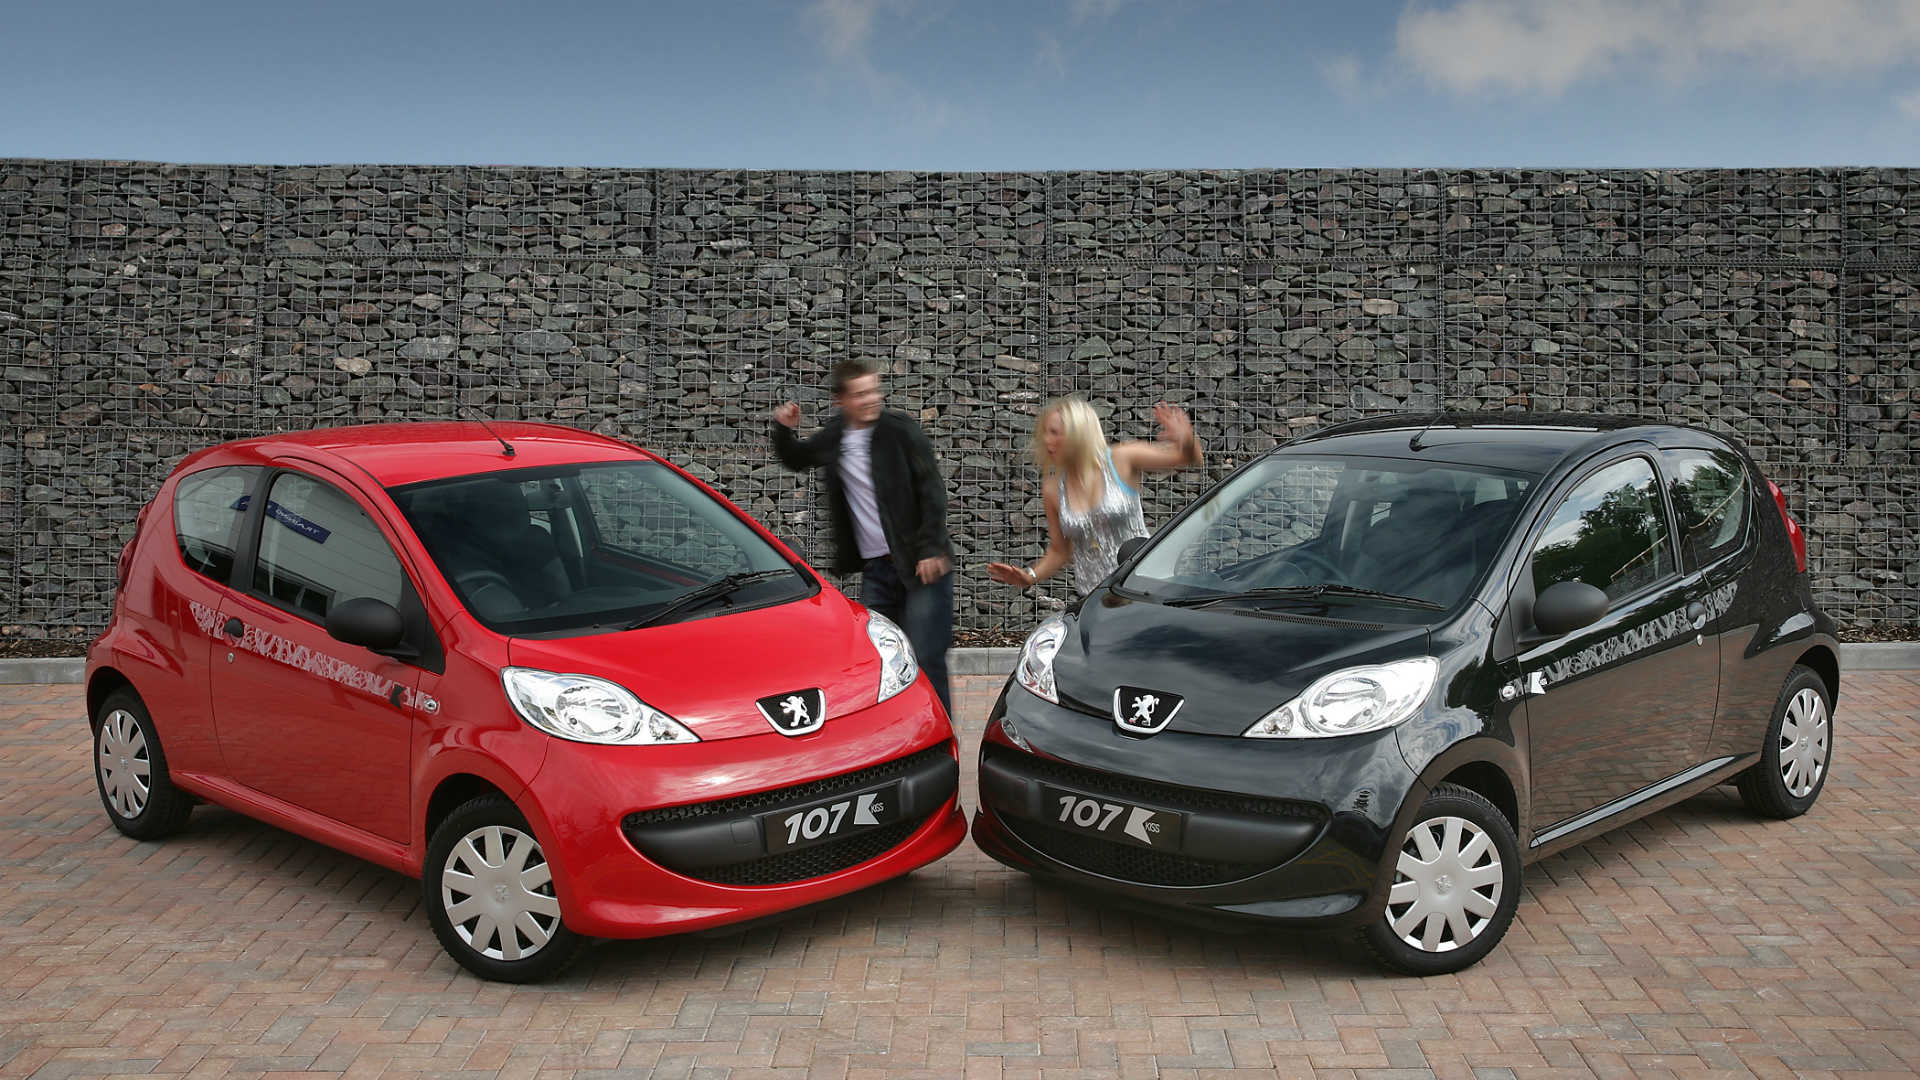 The 10 Cheapest Cars For 17 Year Olds To Insure Motoring within dimensions 1920 X 1080